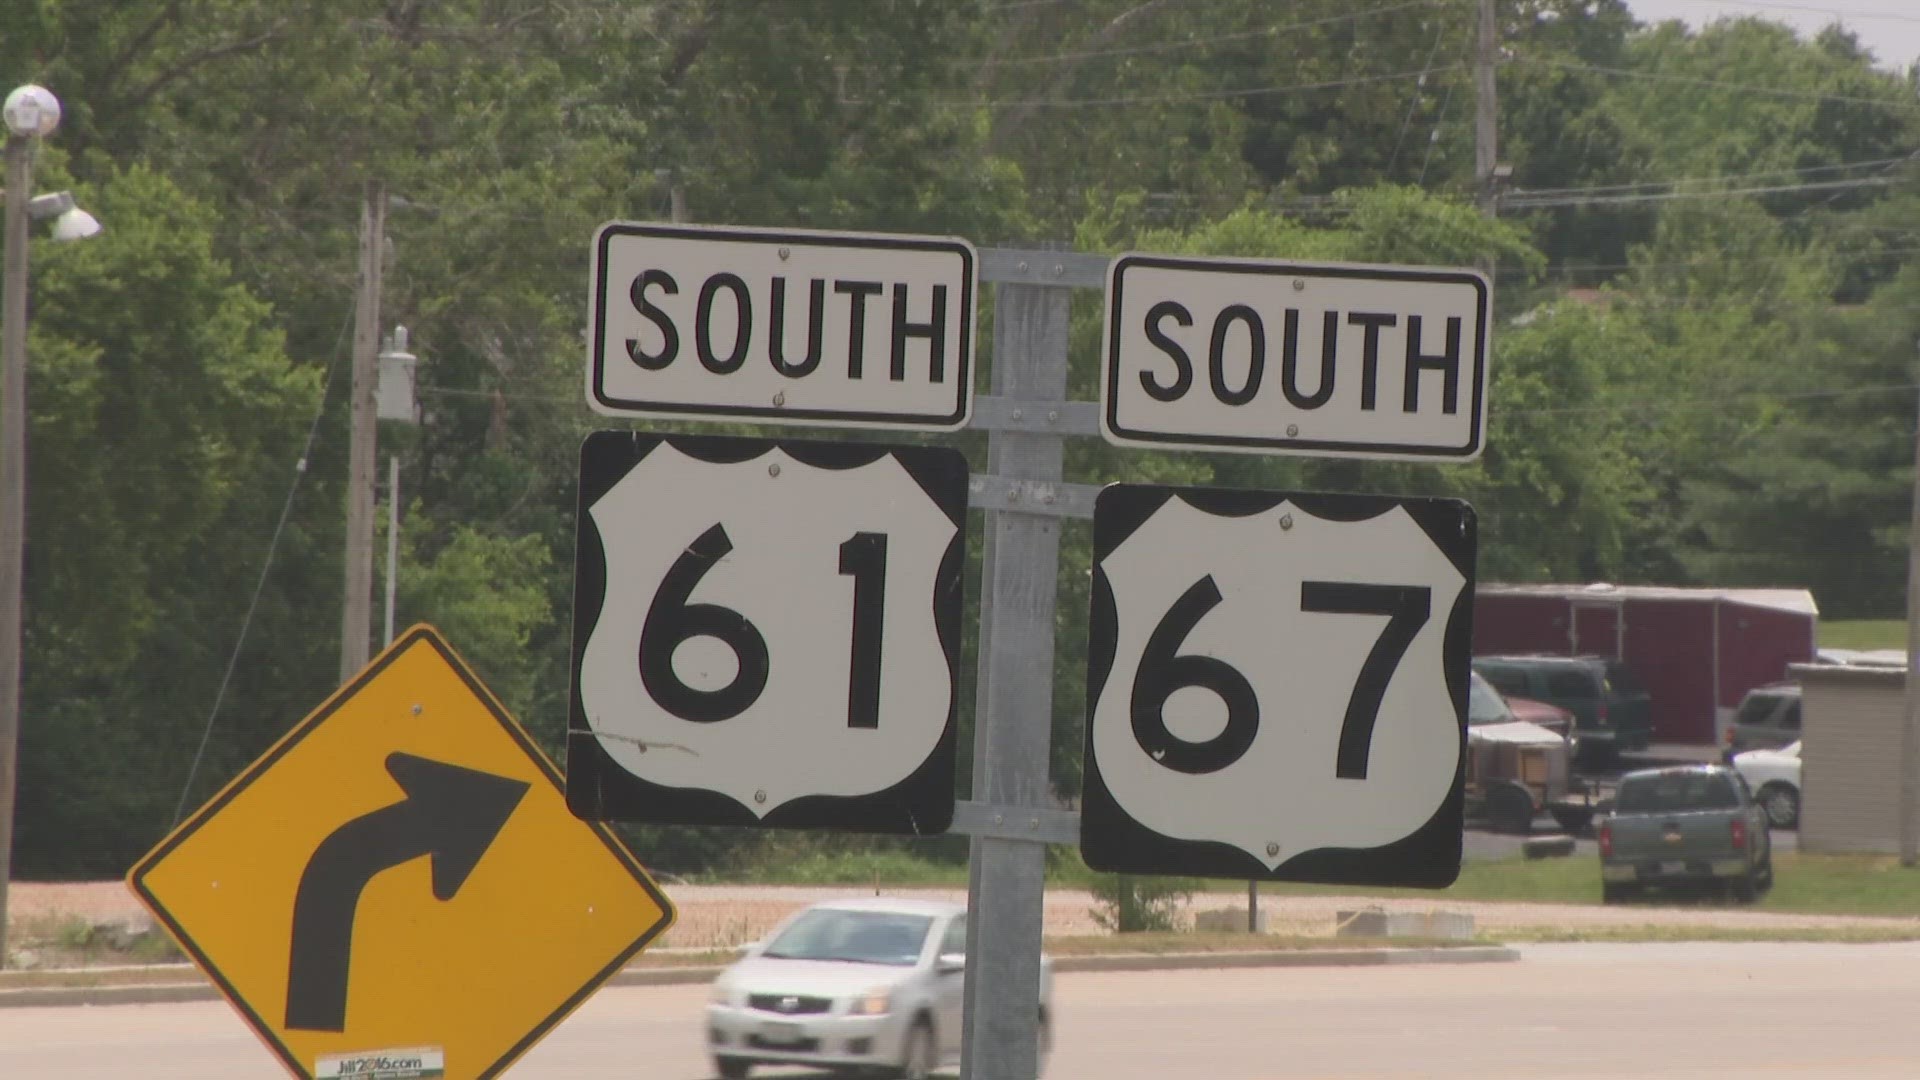 MoDOT begins major light upgrades along Jefferson County roads. The department will pay Reinhold Electric of St. Louis more than $500,000 to do the upgrades.